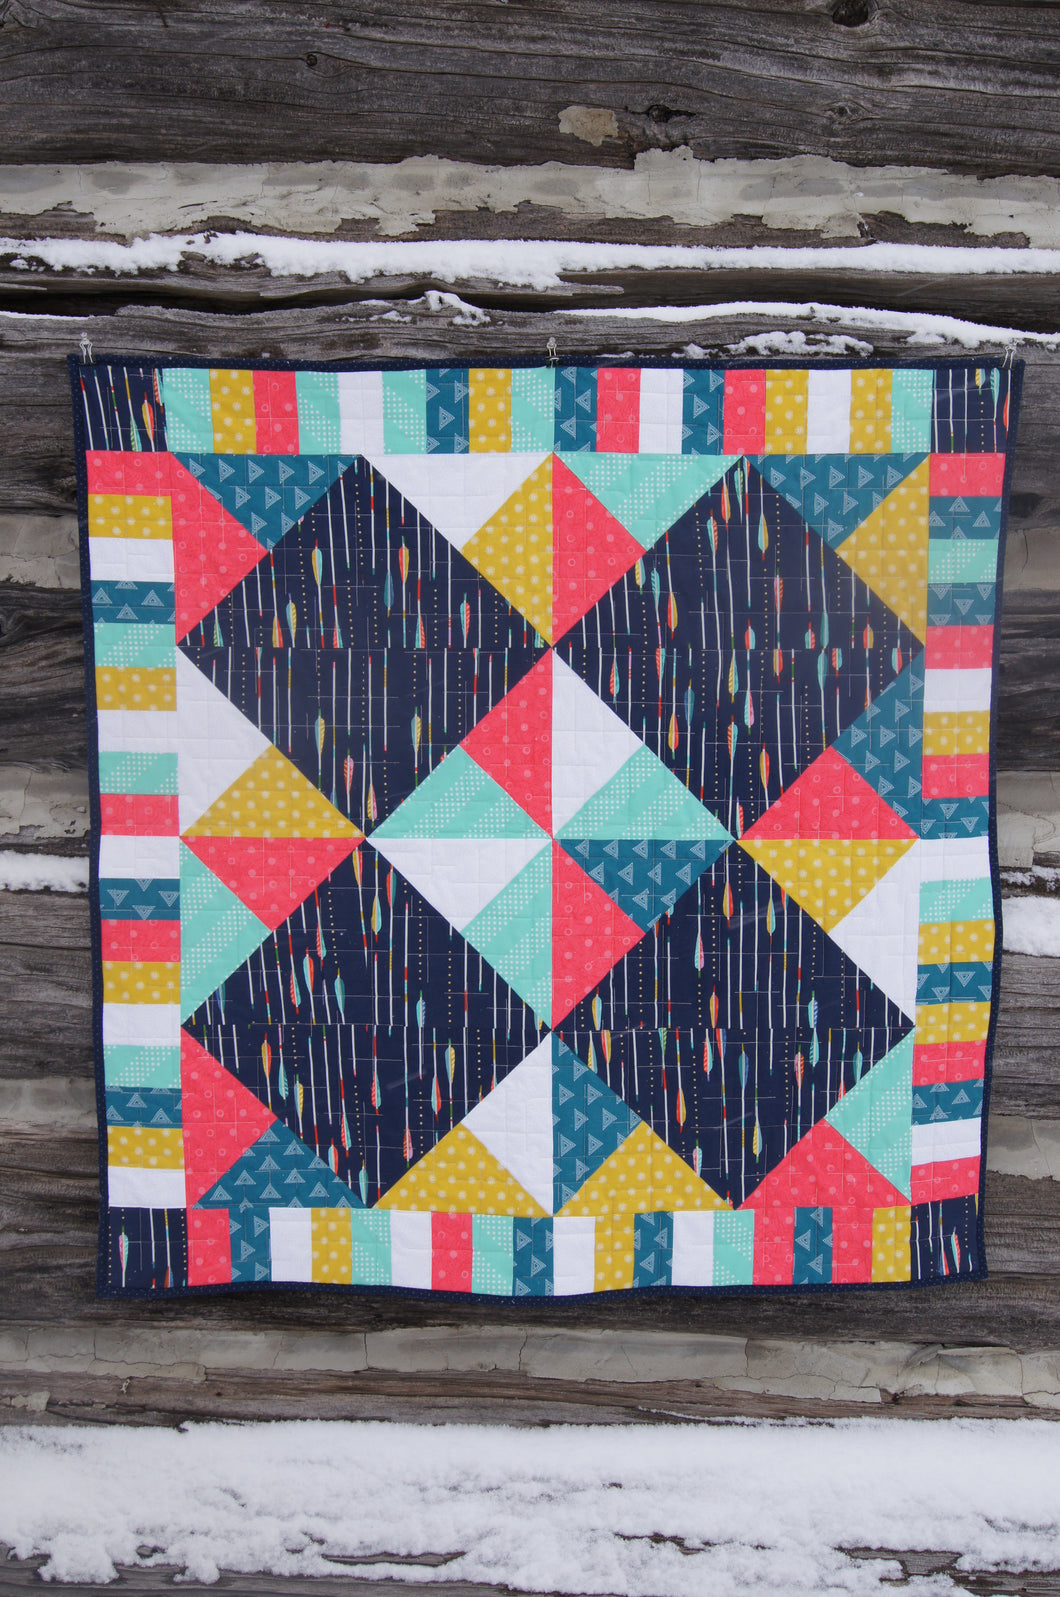 Canadian Diamond quilt pattern by Penny Spool Quilts, featuring four large diamonds surrounded by half-square triangles and a pieced border. Quilt shown in navy with pink, yellow, aqua and white accents, hanging from log wall.